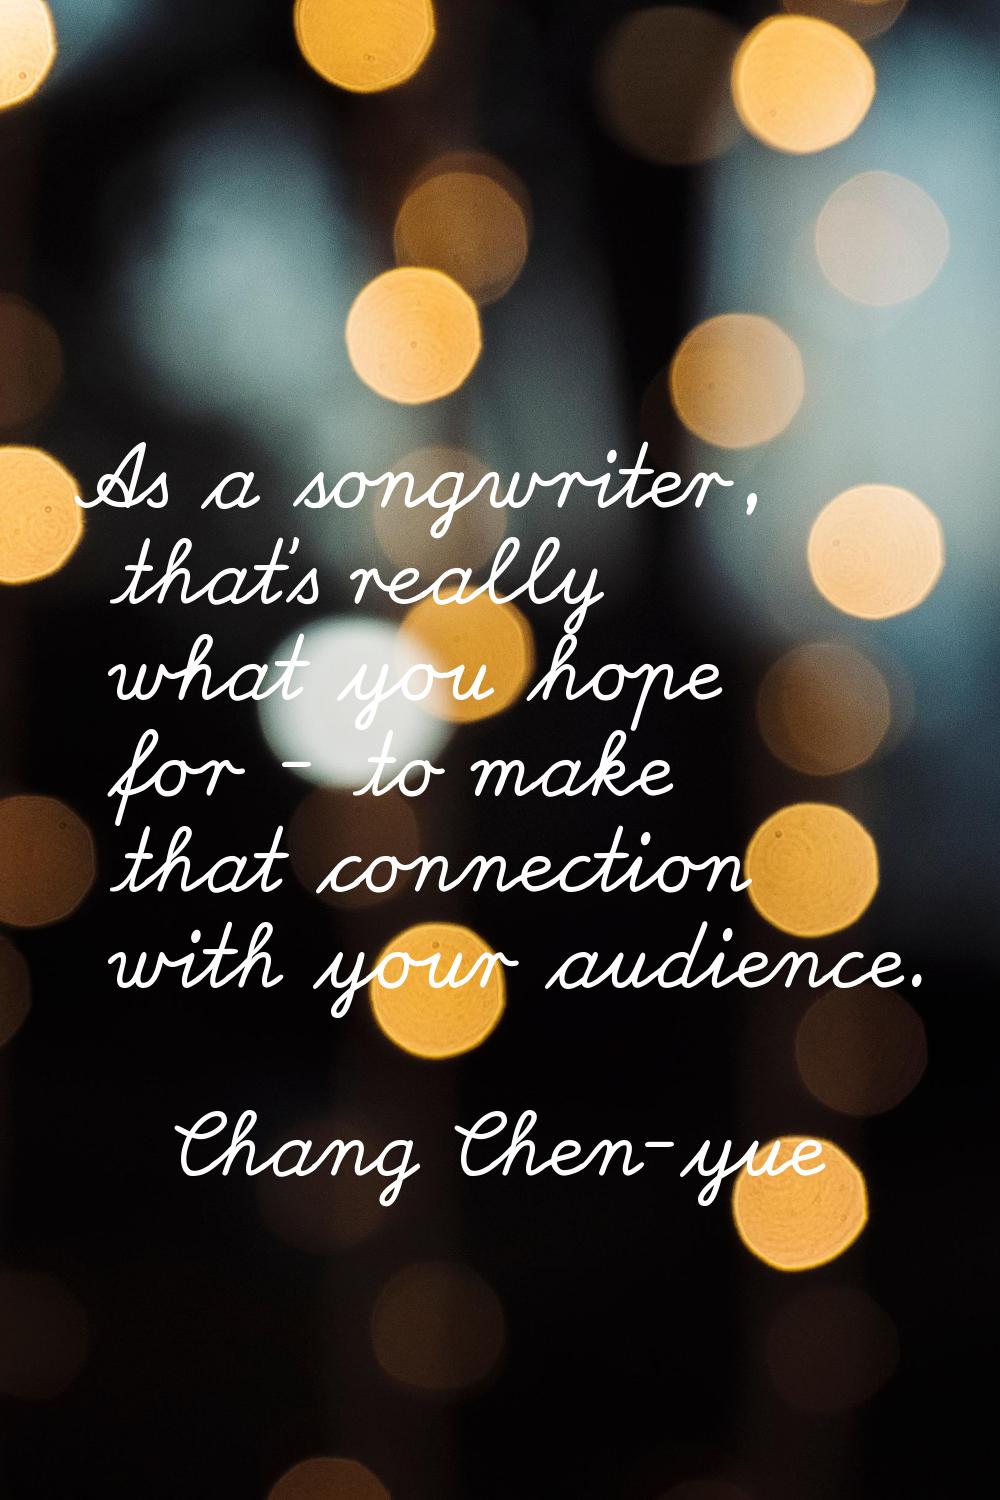 As a songwriter, that's really what you hope for - to make that connection with your audience.